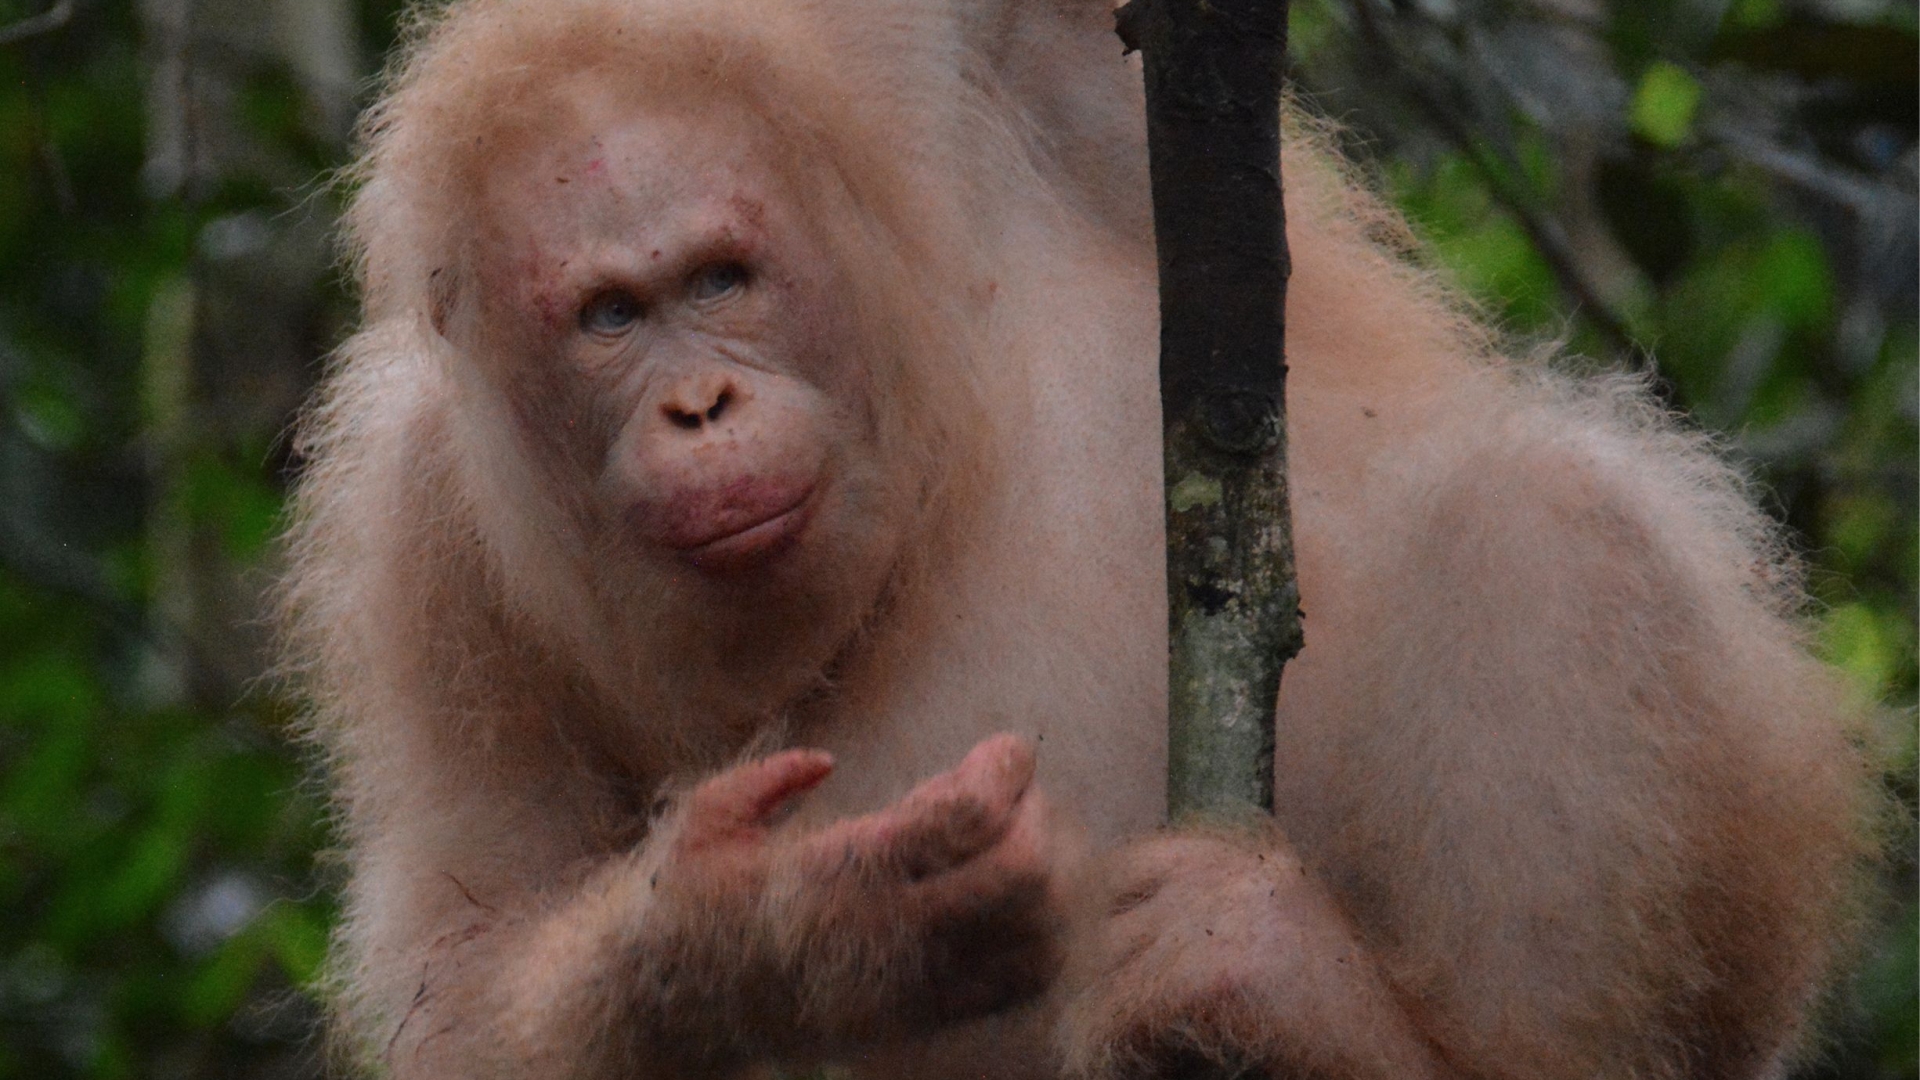 Incredible photo show world's only ALBINO orangutan living happily in Borneo rainforest a year after being released